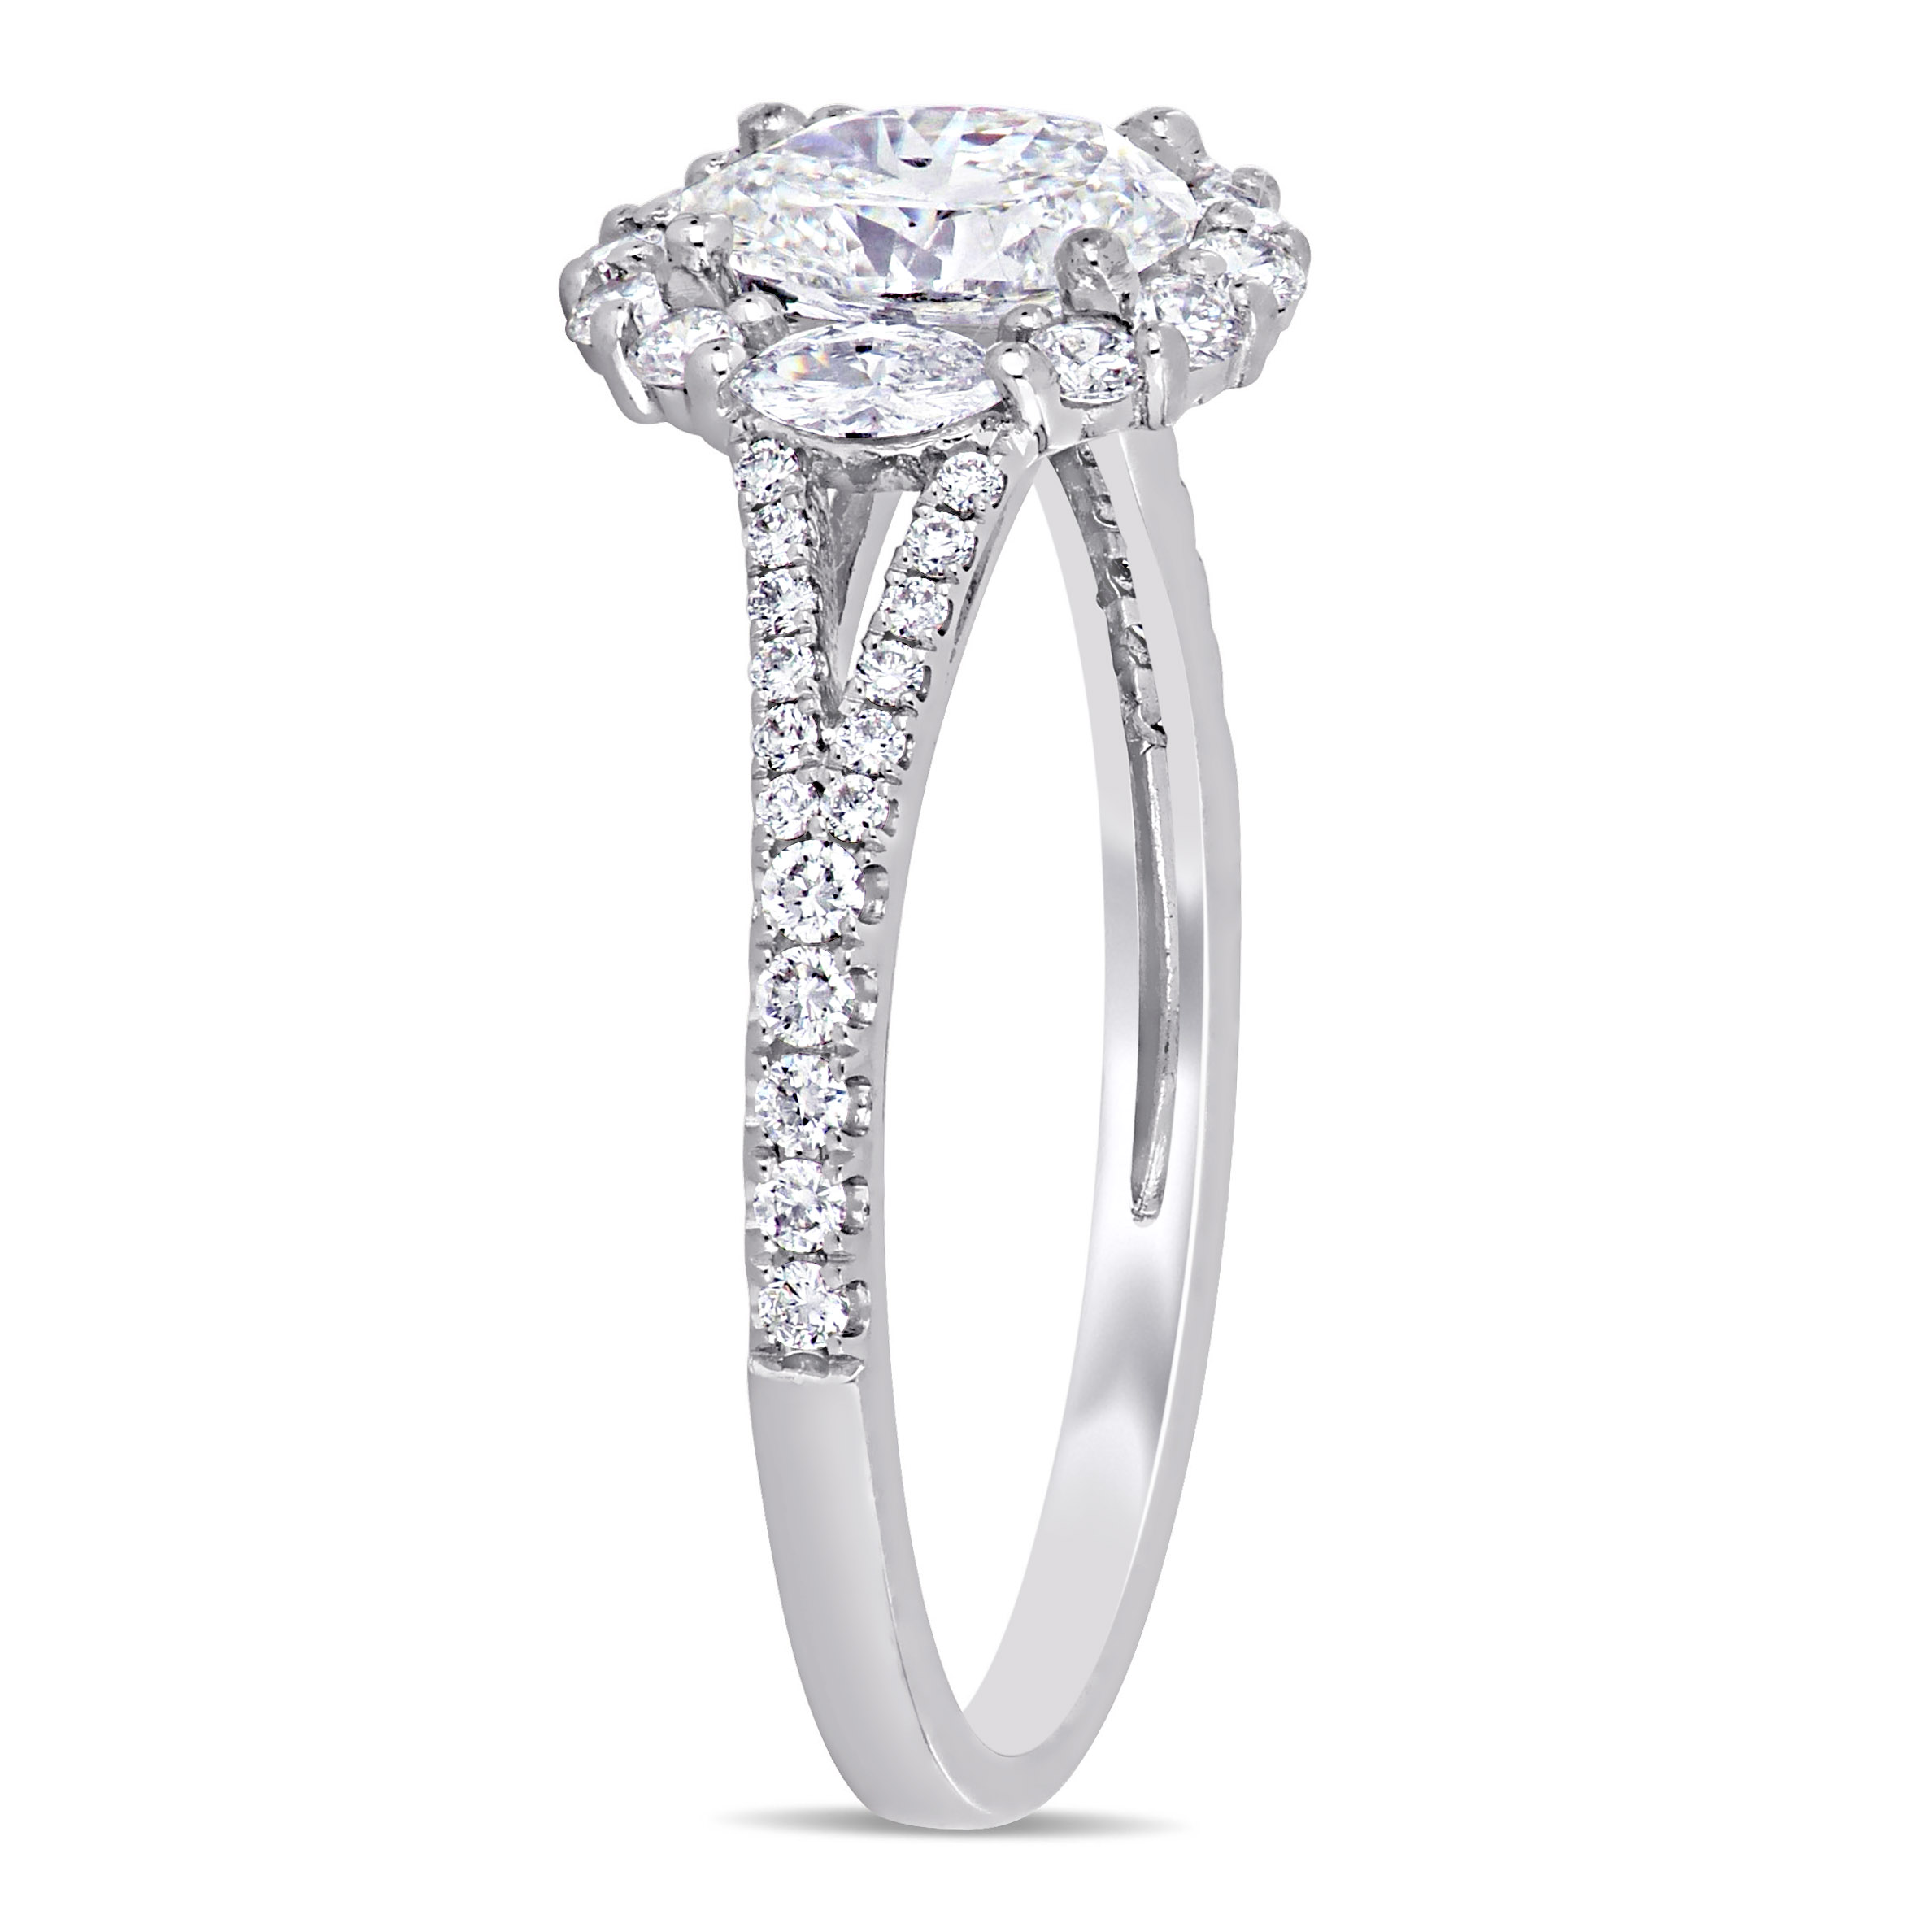 1 1/8 CT TW Diamond Halo Engagement Ring in 14k White Gold